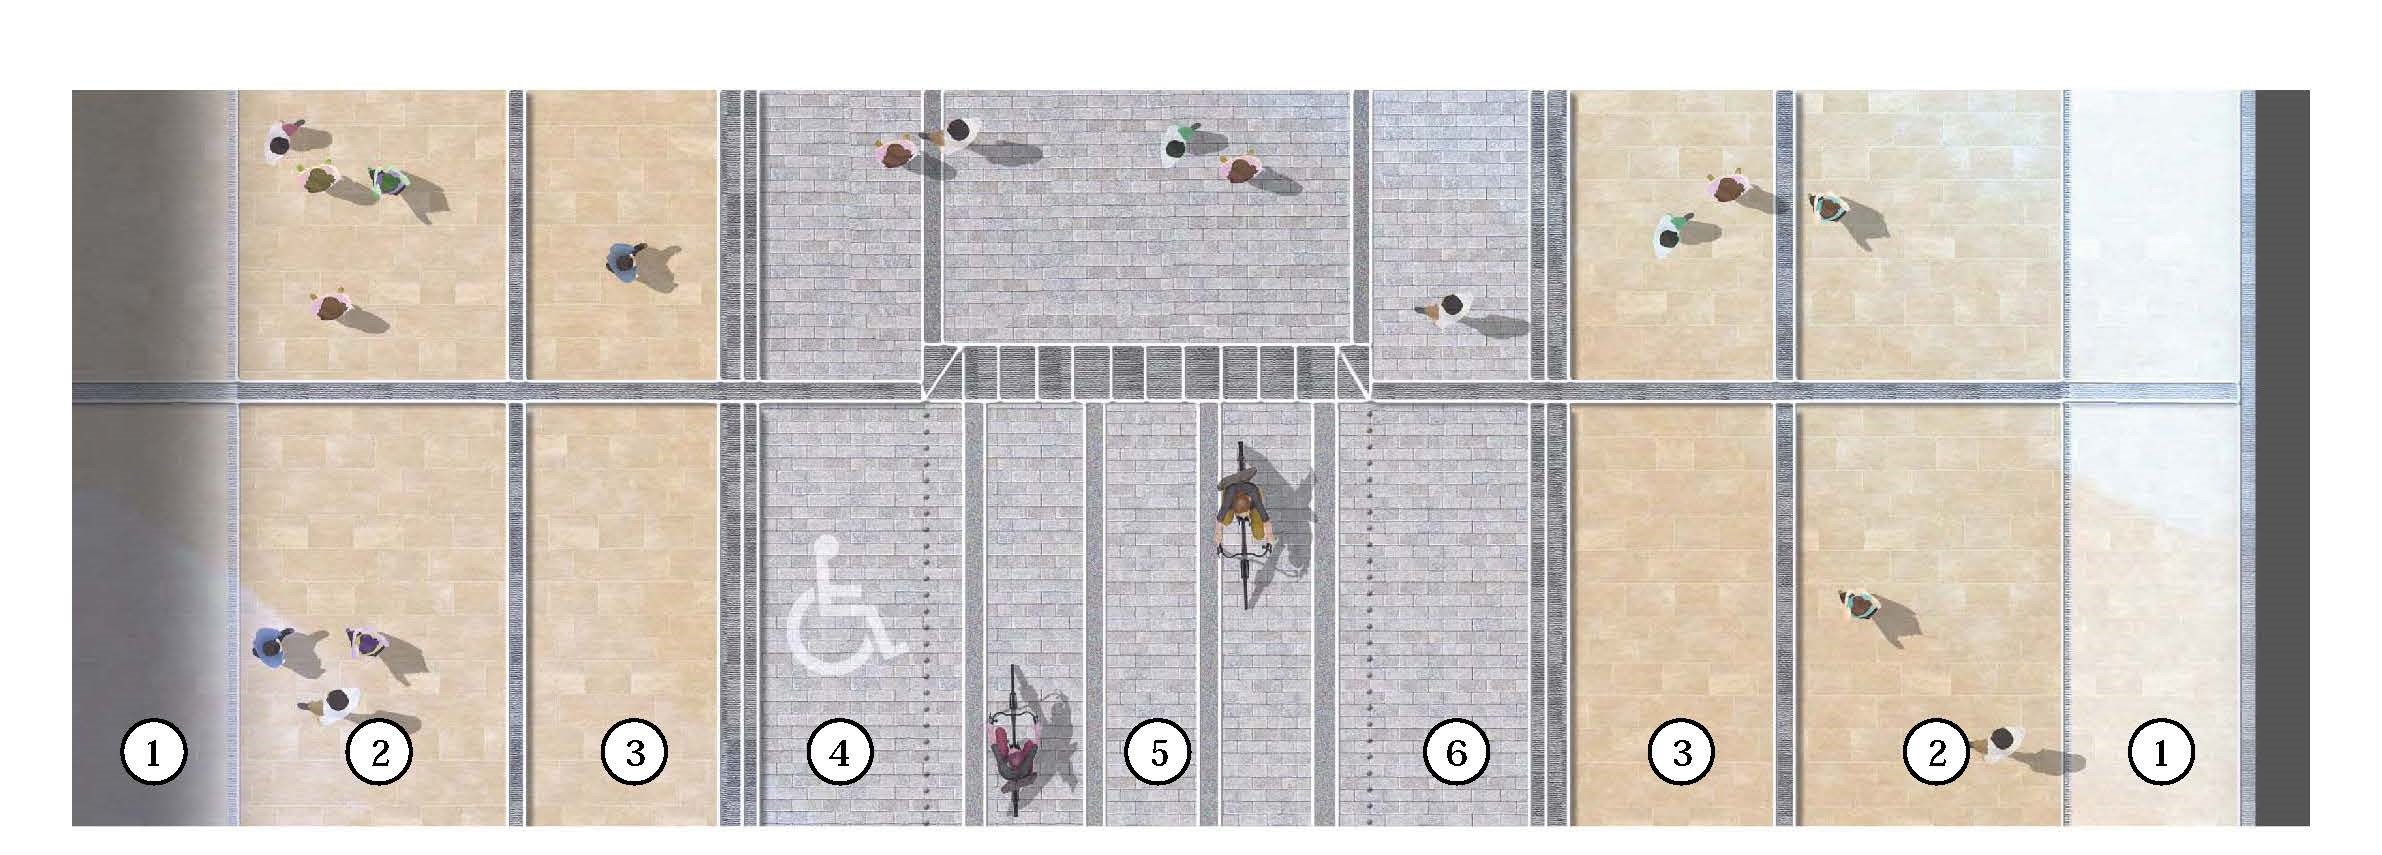 Birds eye view of section of street. Spill out section to the far left and right. Pavement second to the left and right. Flex zone third from left and right. Disabled parking, fourth from left. Cycle street down the centre. Loading/ taxi space, sixth from left.